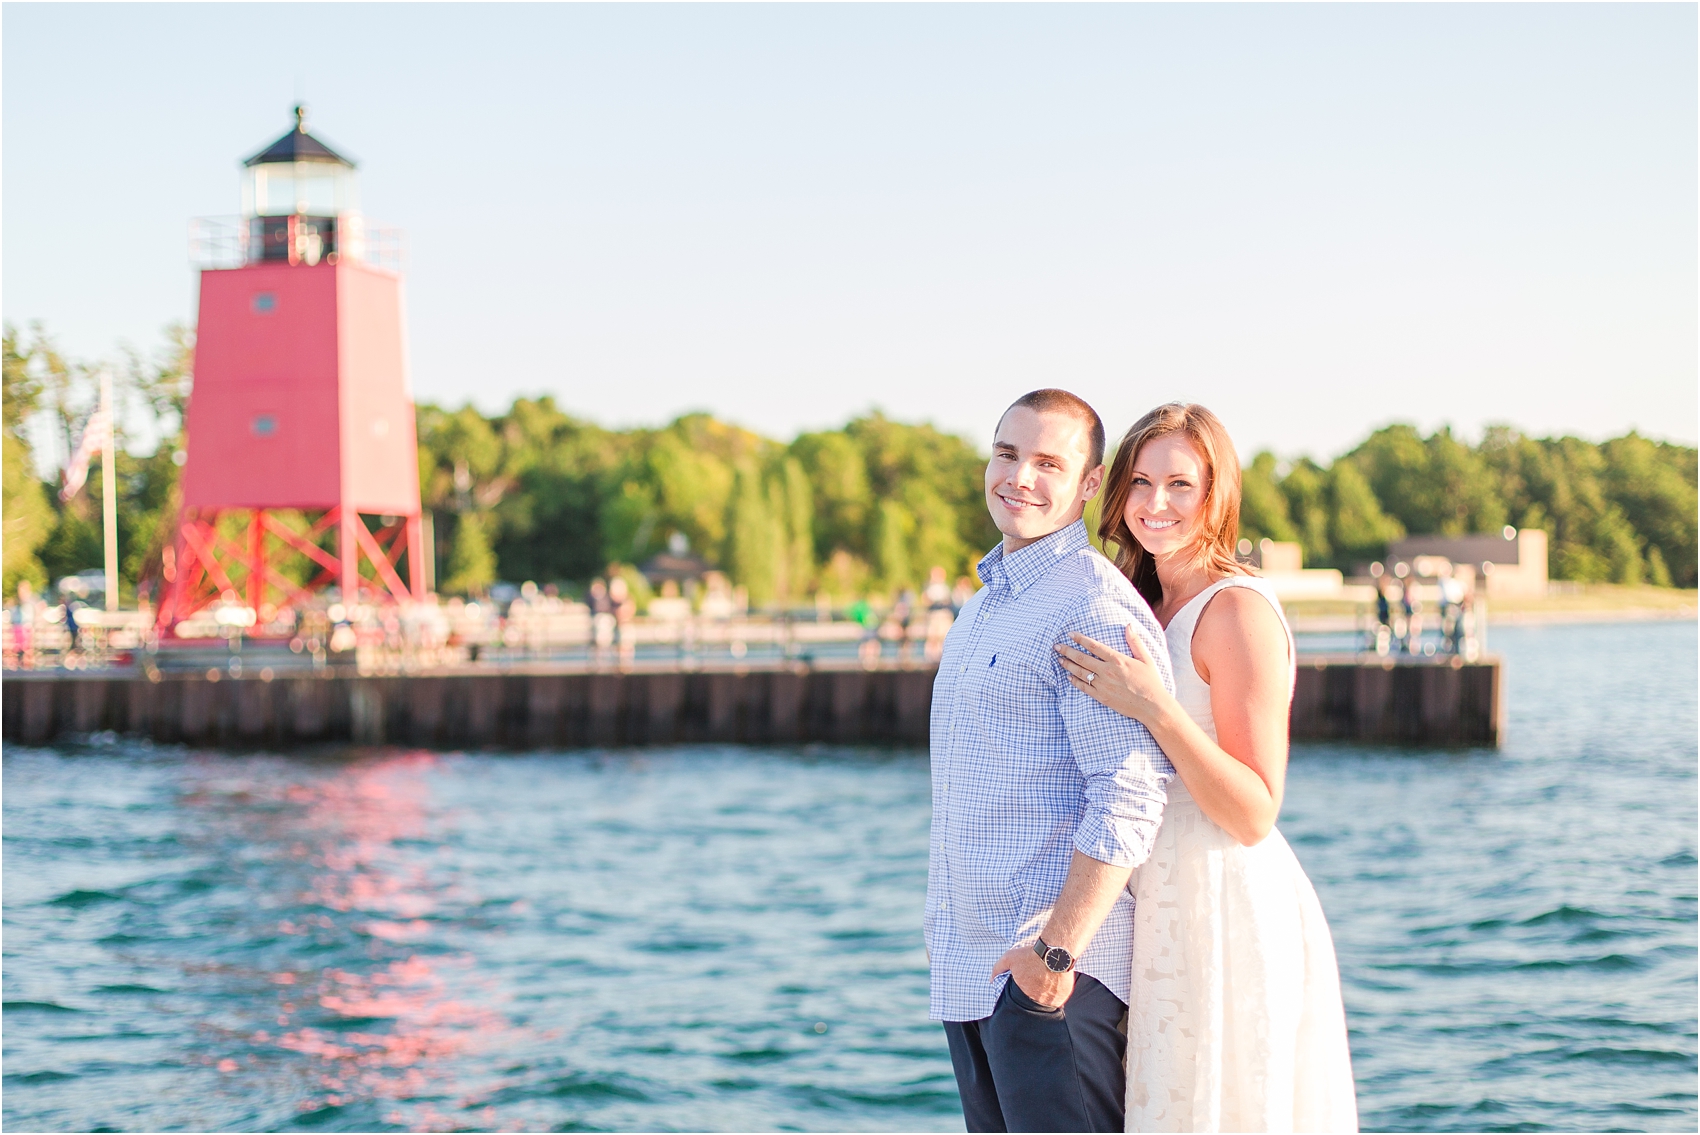 romantic-sunset-engagement-photos-at-the-lighthouse-in-charlevoix-mi-by-courtney-carolyn-photography_0007.jpg